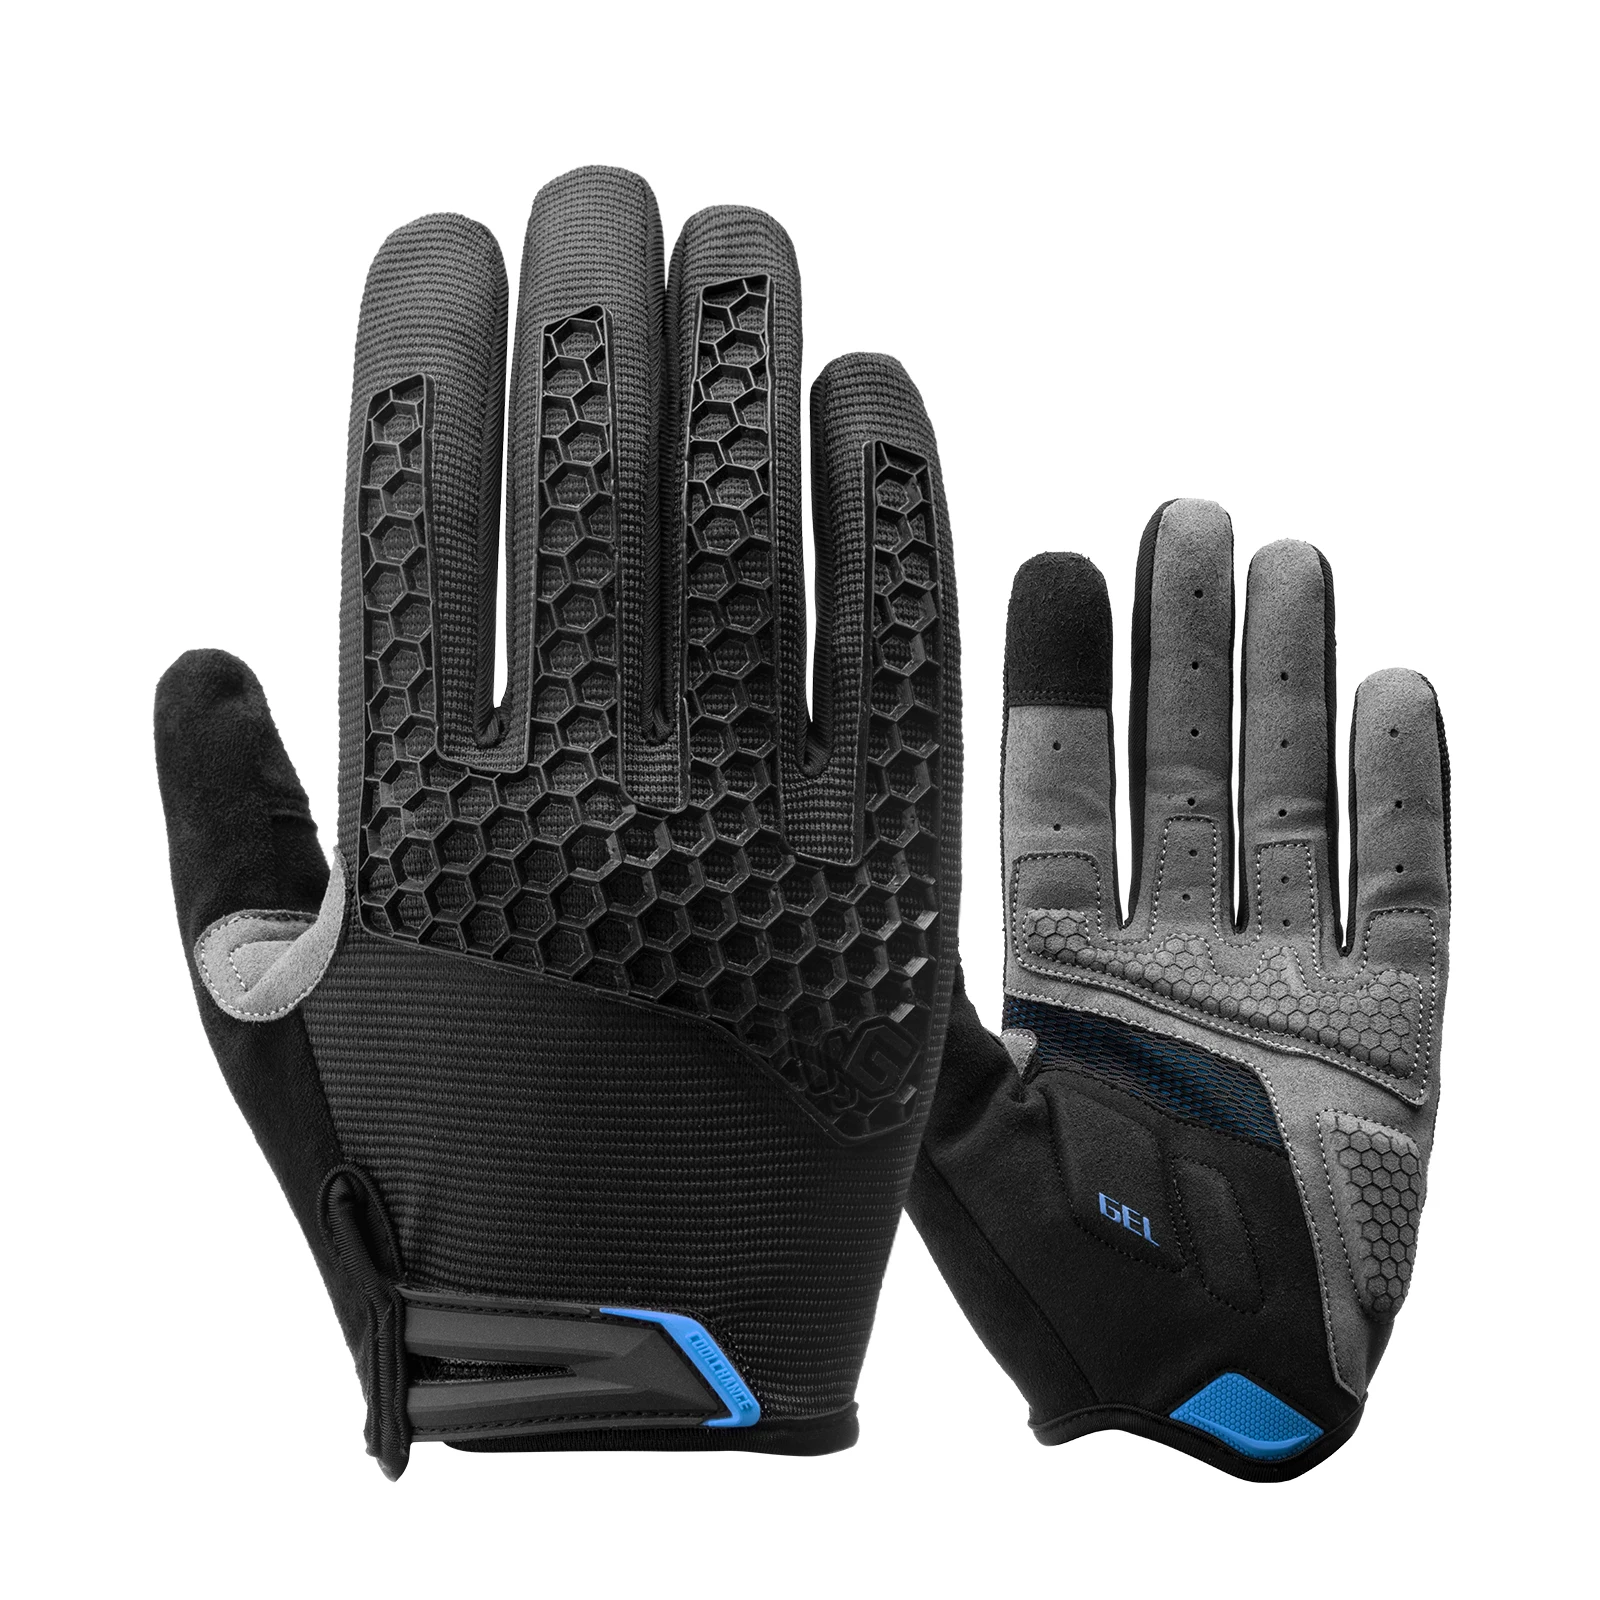 

CoolChange Gloves Touch Screen Cycling Glove Men Women Full Finger Bicycle guantes GEL Shockproof MTB Rode Bike Protection Glove